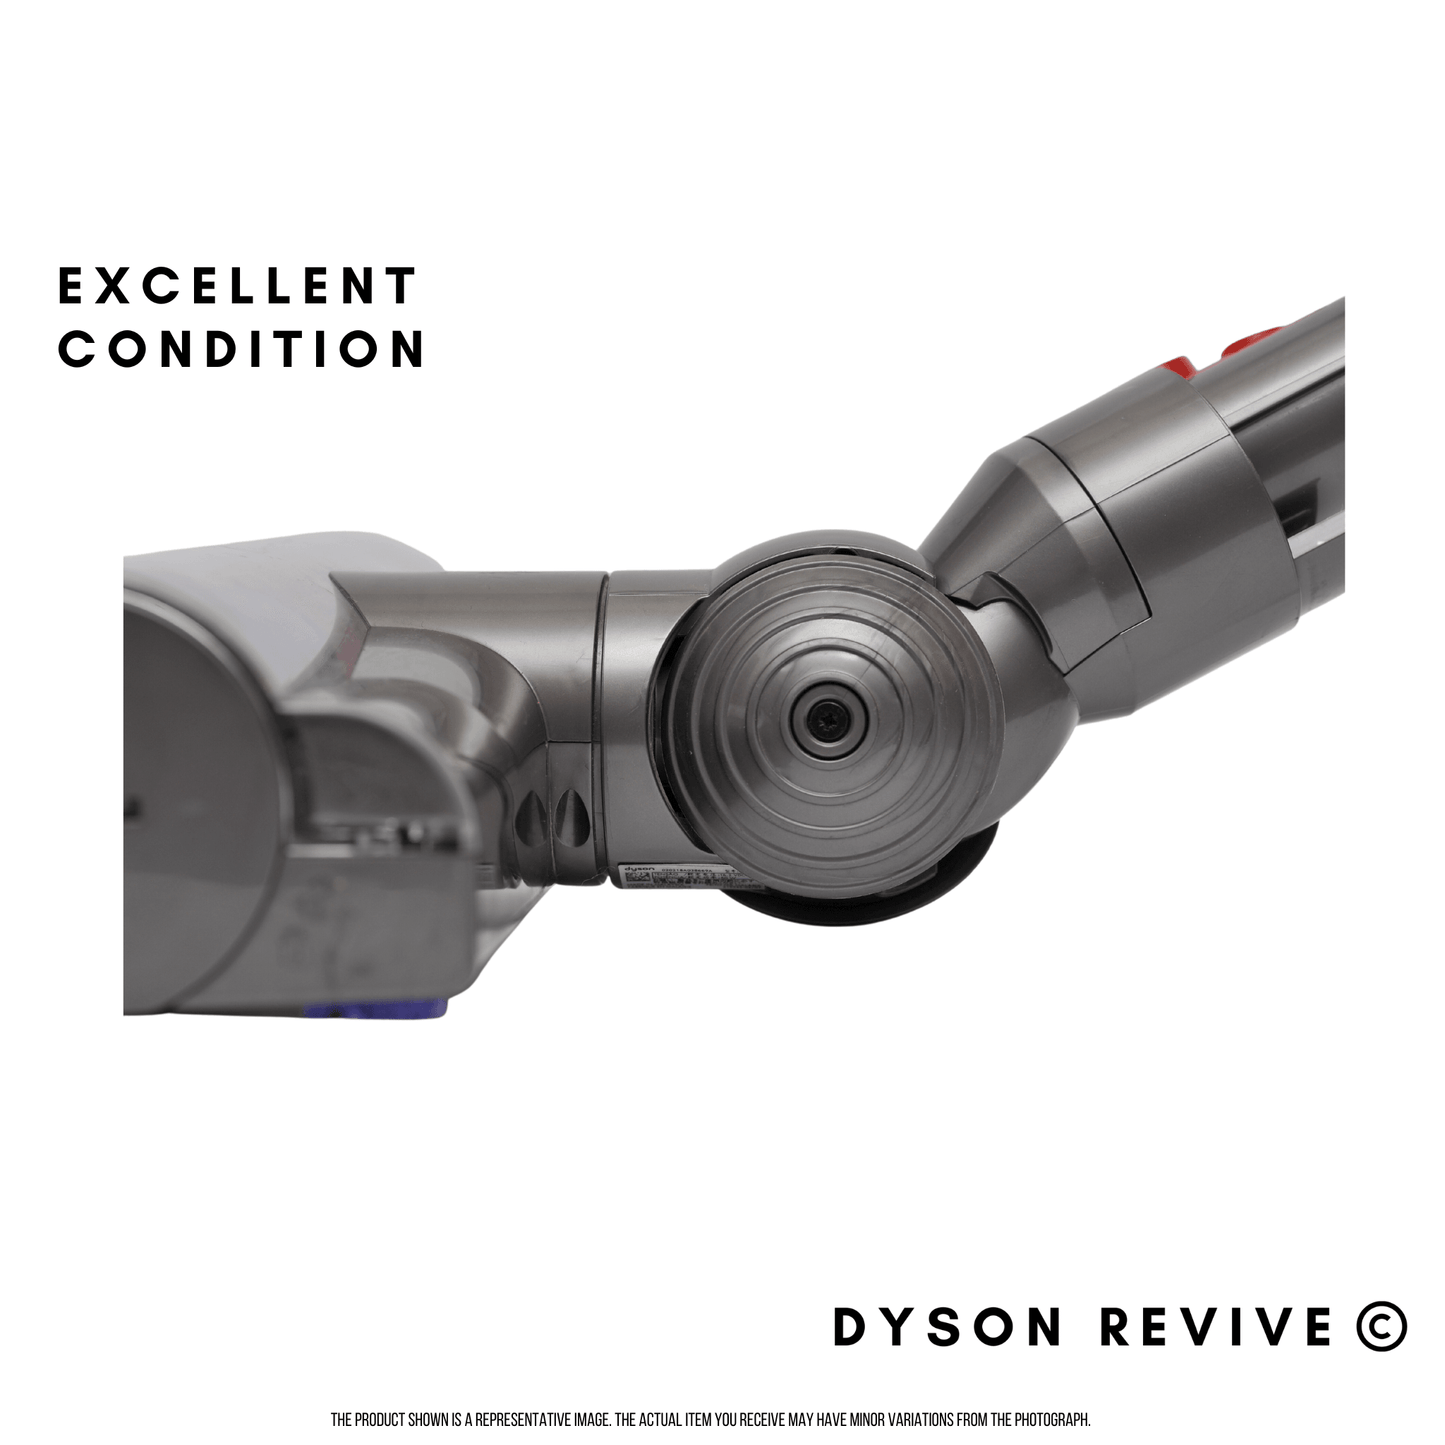 Genuine Dyson Refurbished V8 Direct Drive Vacuum Cleaner Head - Dyson Revive